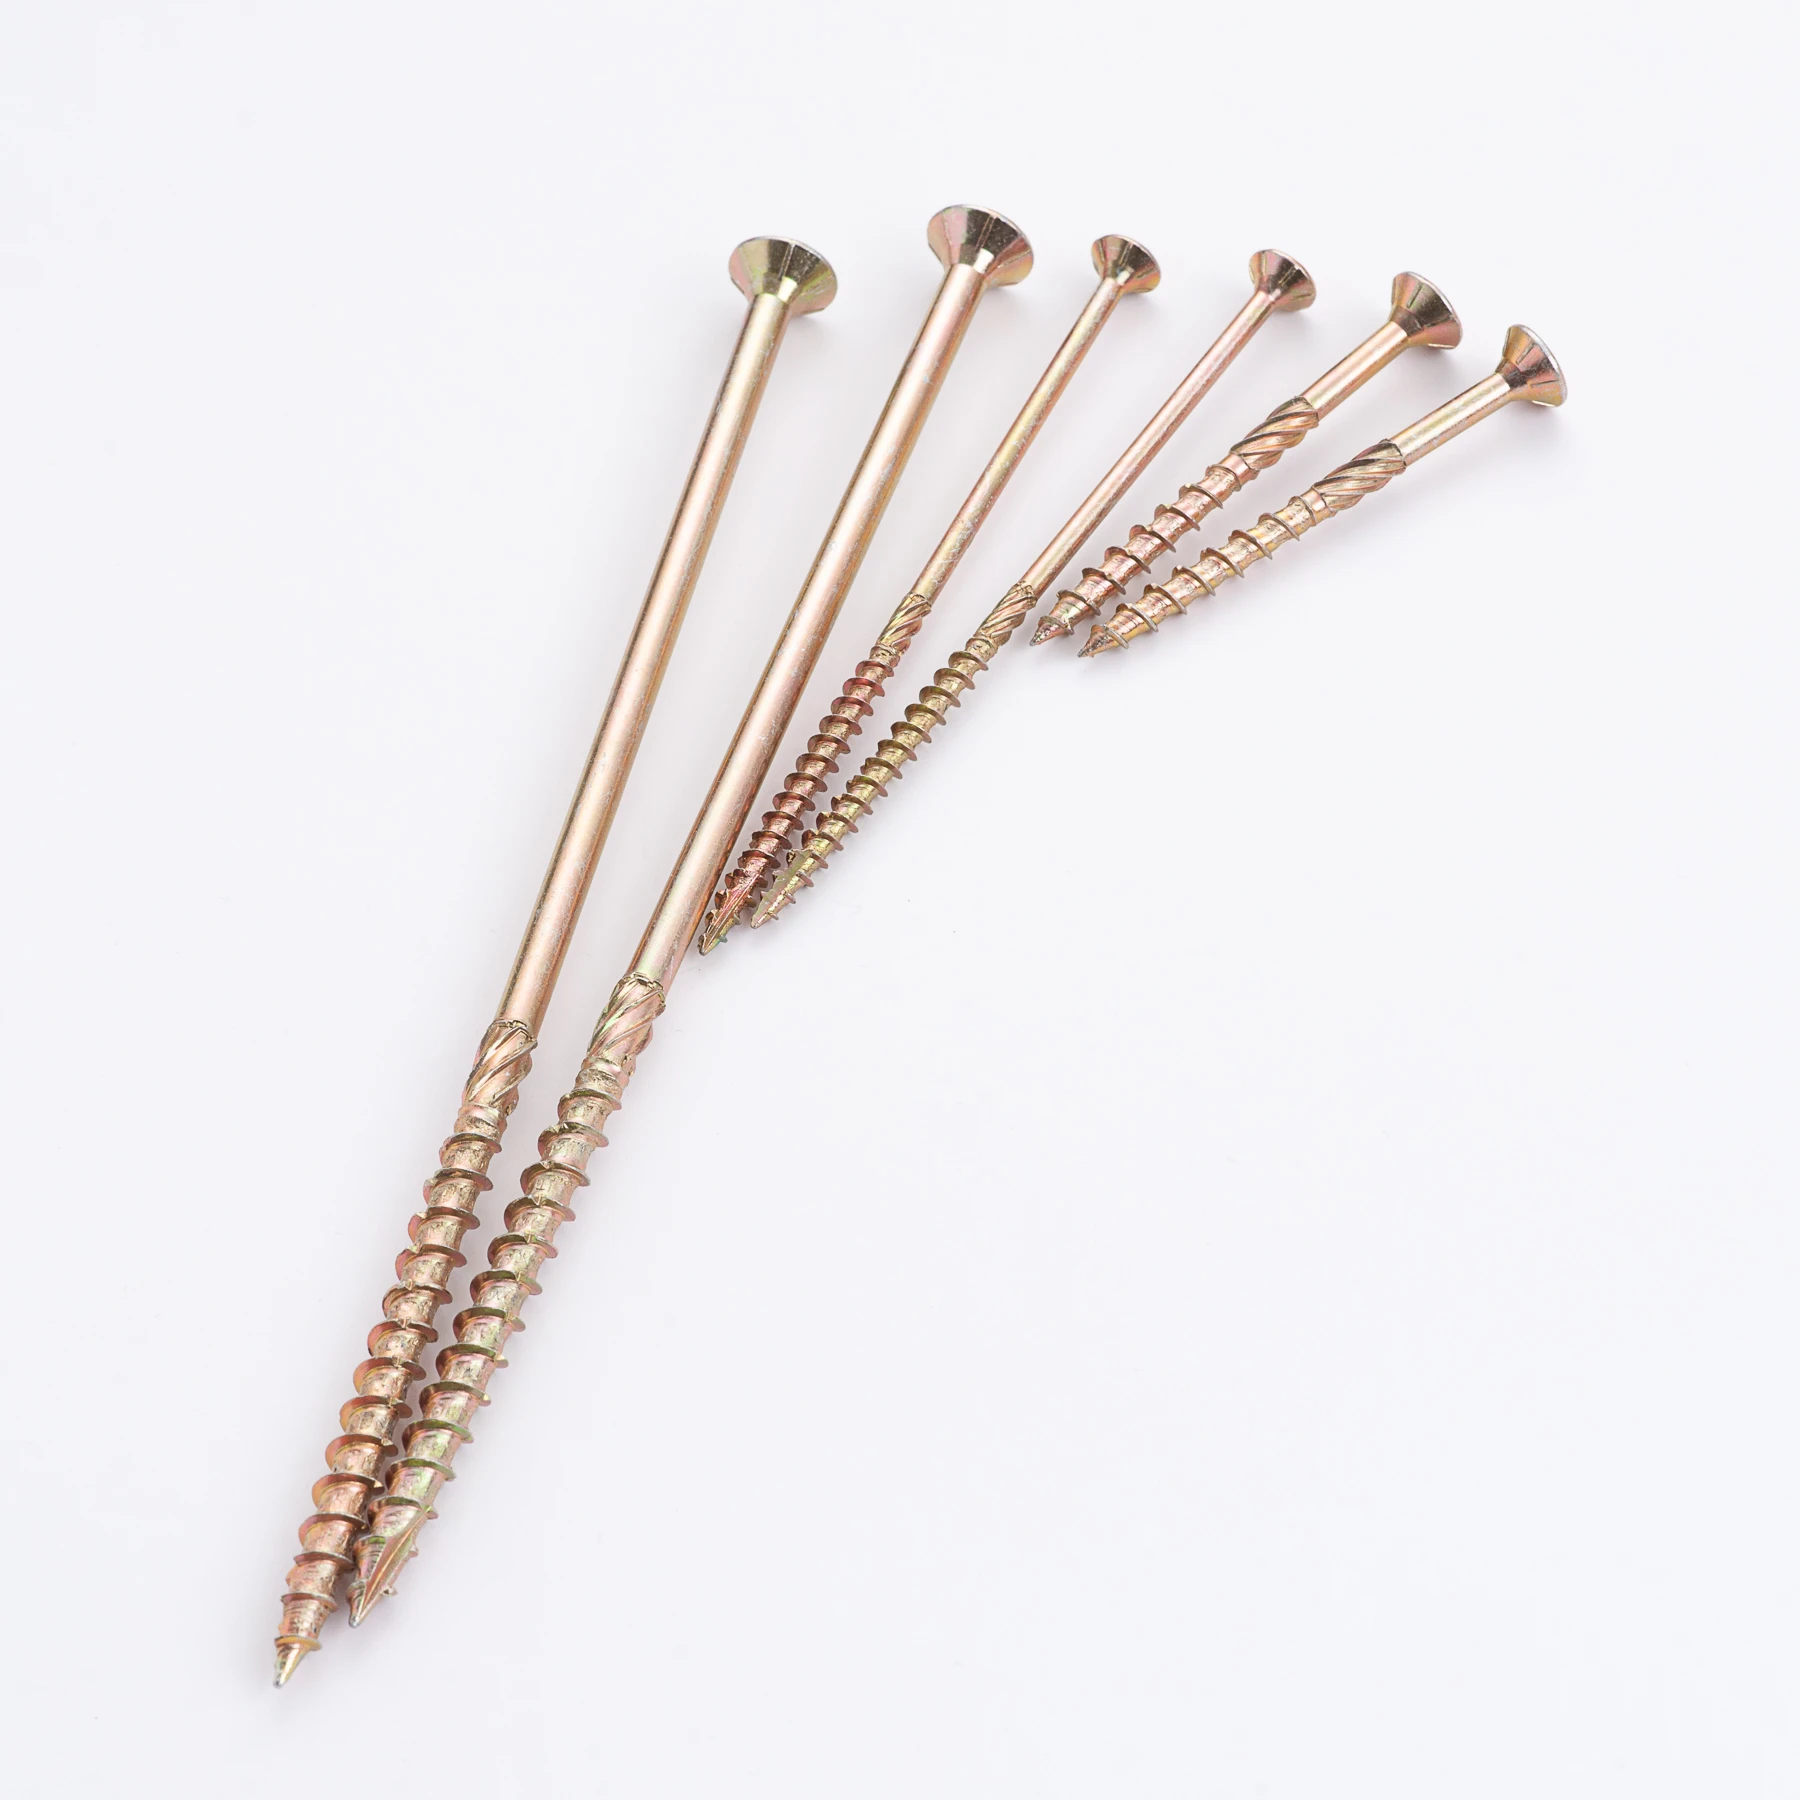 Cheap (5-8)*(100-400) Cold Heading Q195 Screws Stainless Steel Wood for Connection